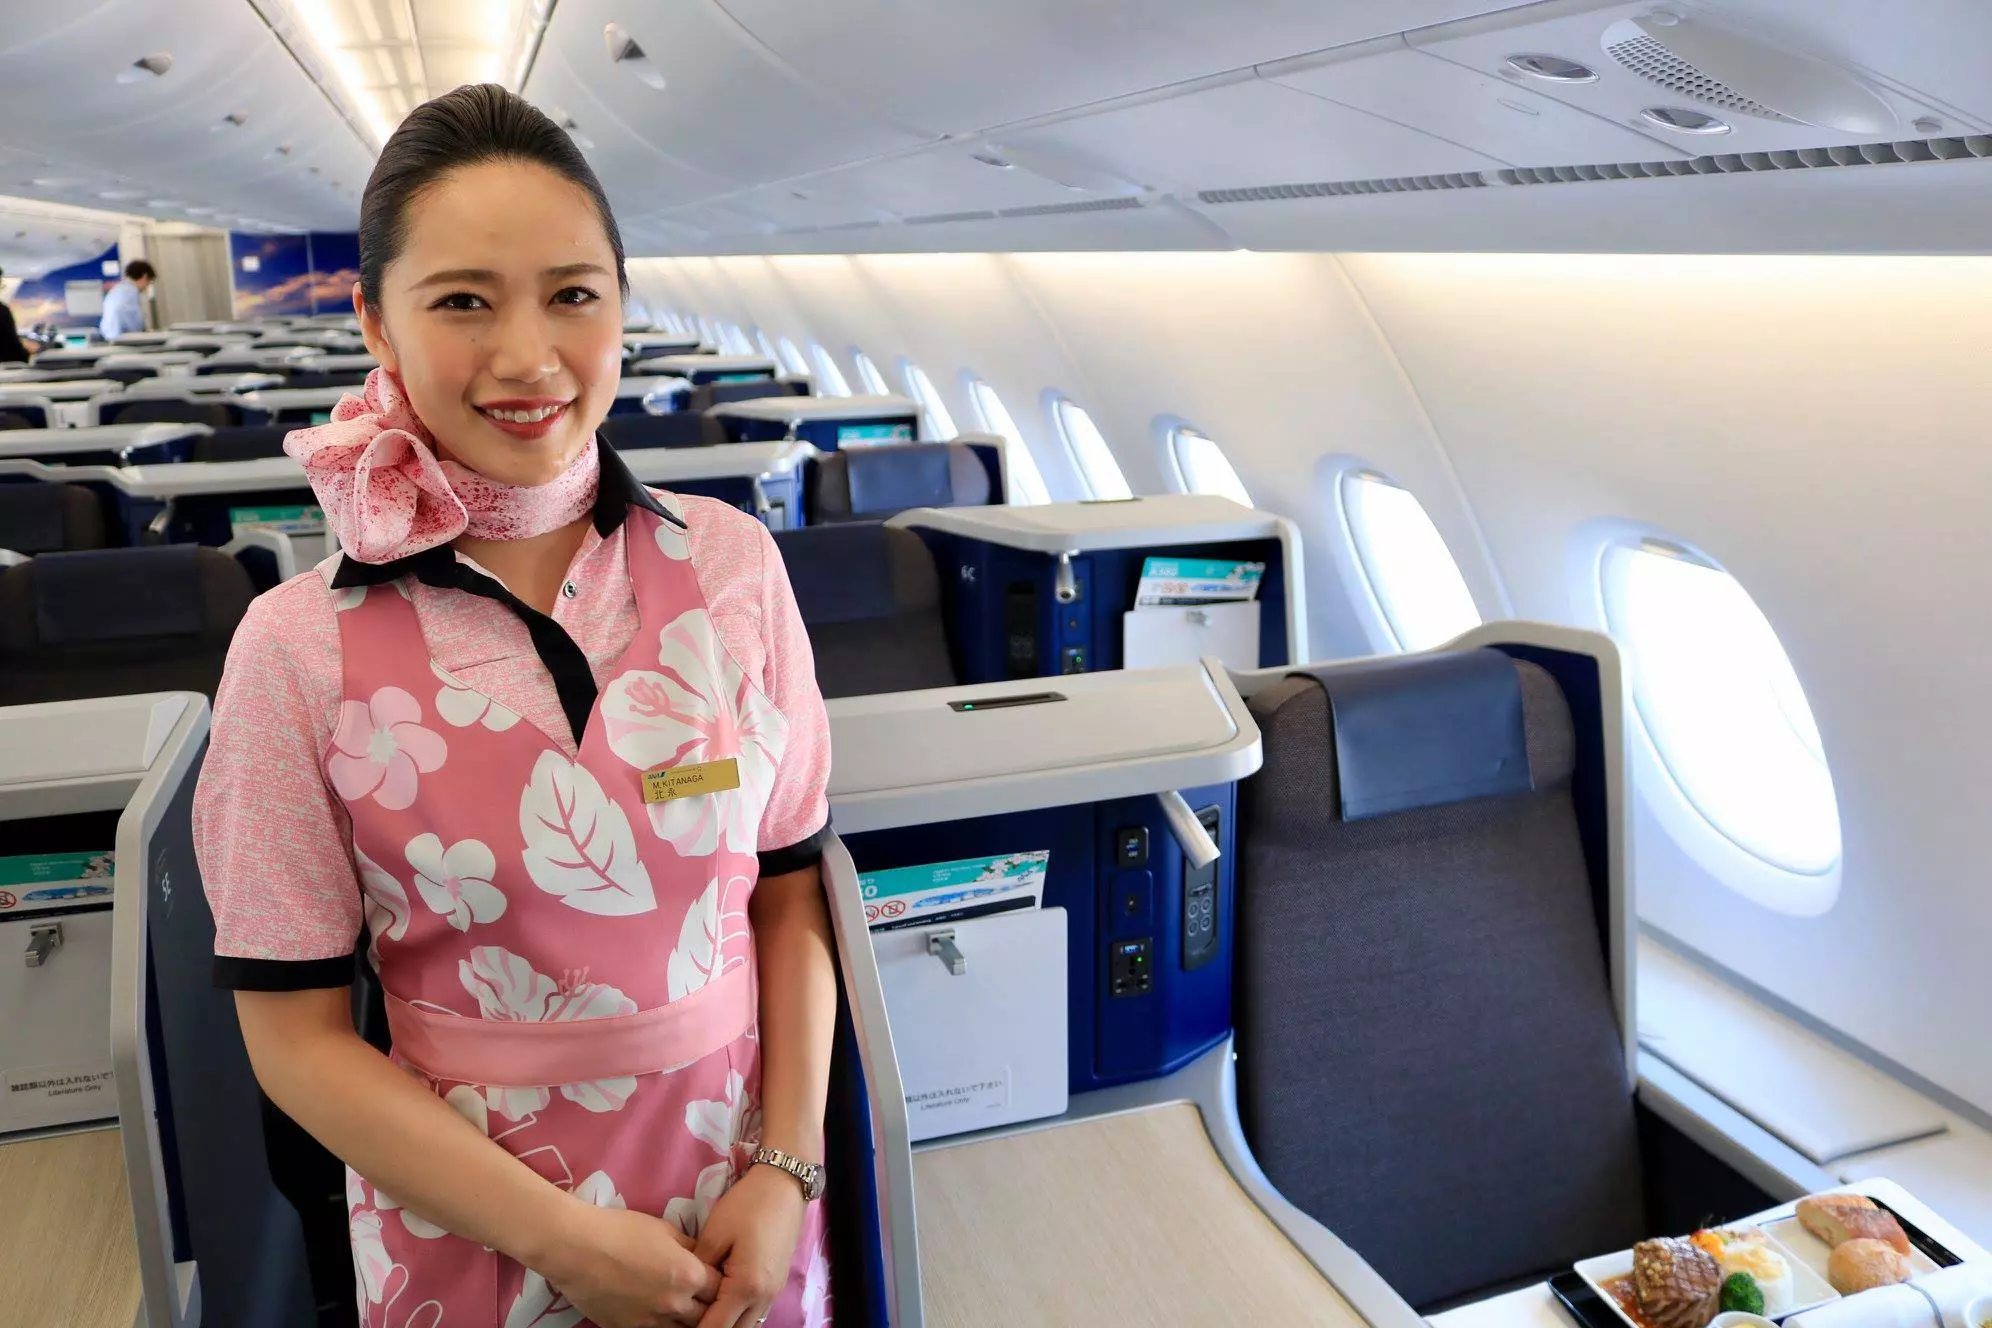 Working at all nippon airways: employee reviews | indeed.com